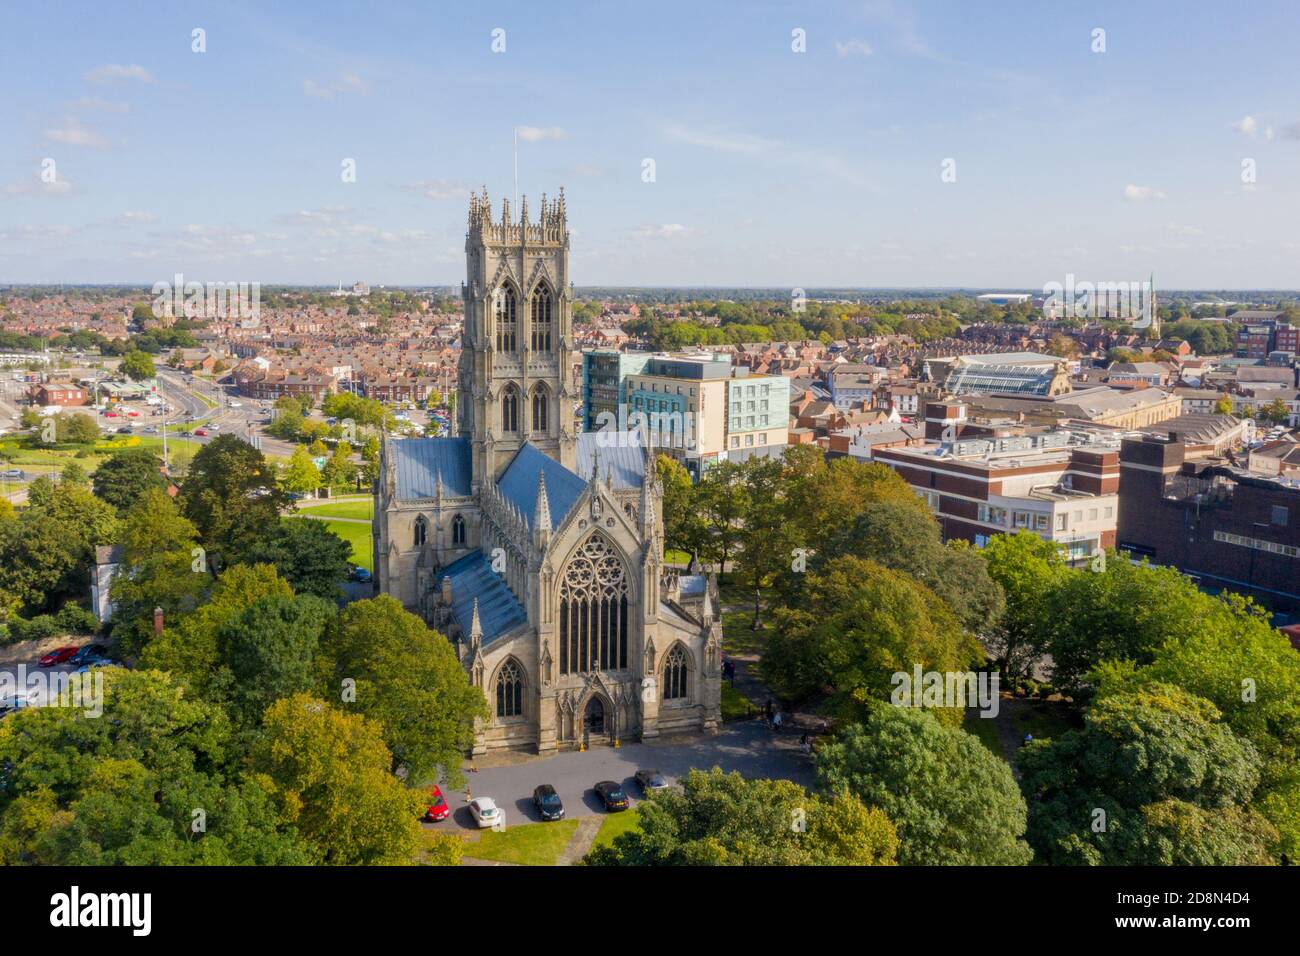 Doncaster St Georges Minster drone photograph of large church showing surrounding town centre area of Doncaster South Yorkshire on a sunny day Stock Photo